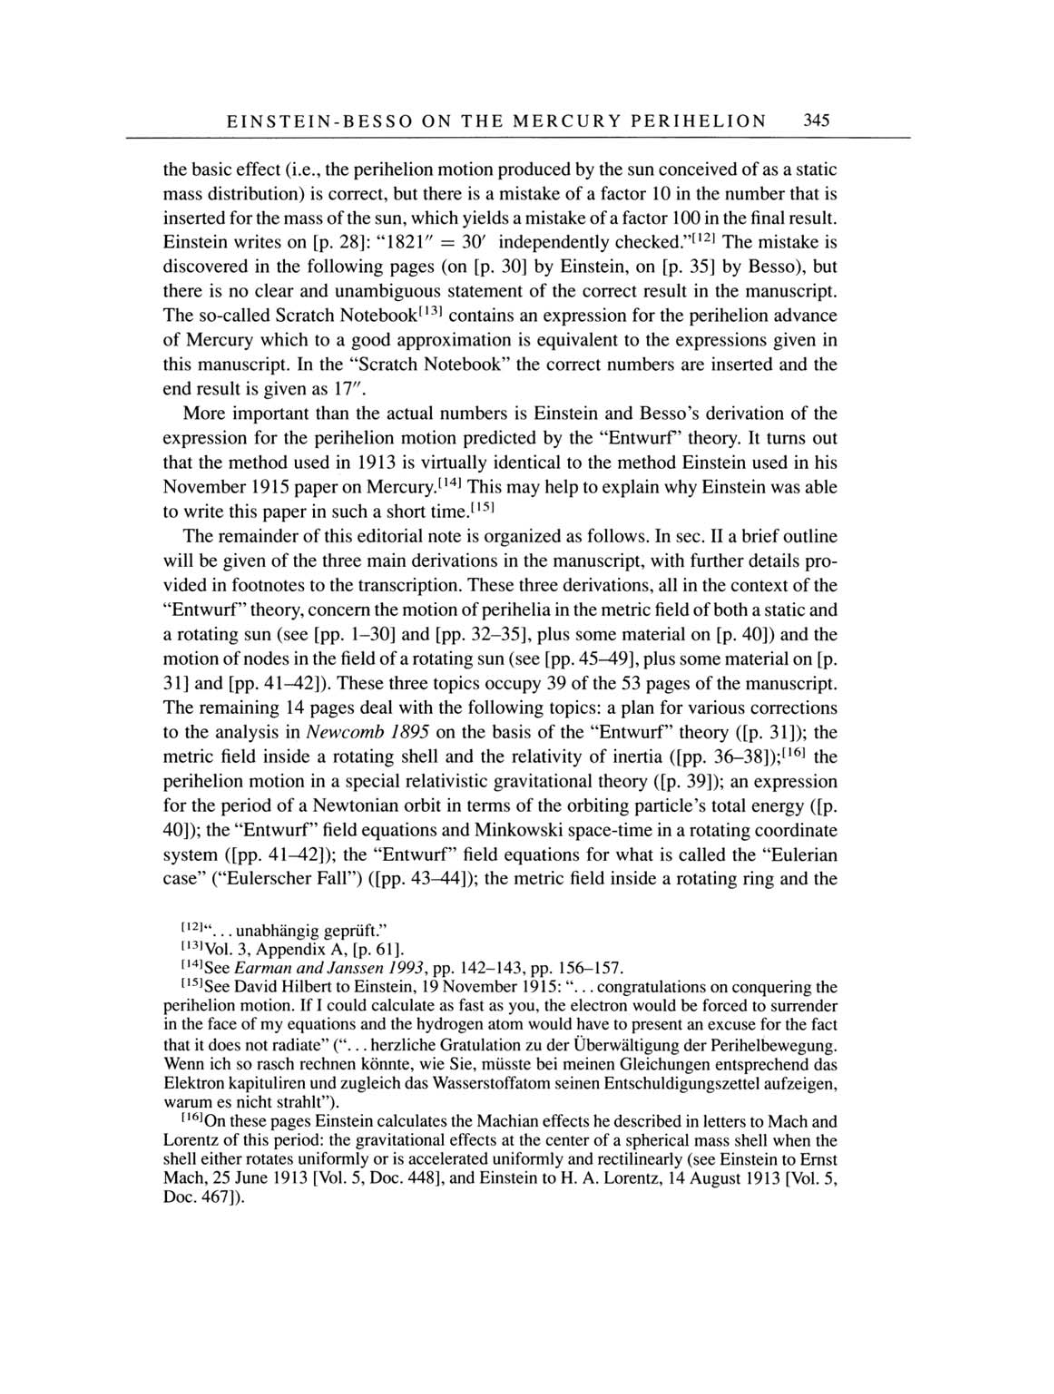 Volume 4: The Swiss Years: Writings 1912-1914 page 345